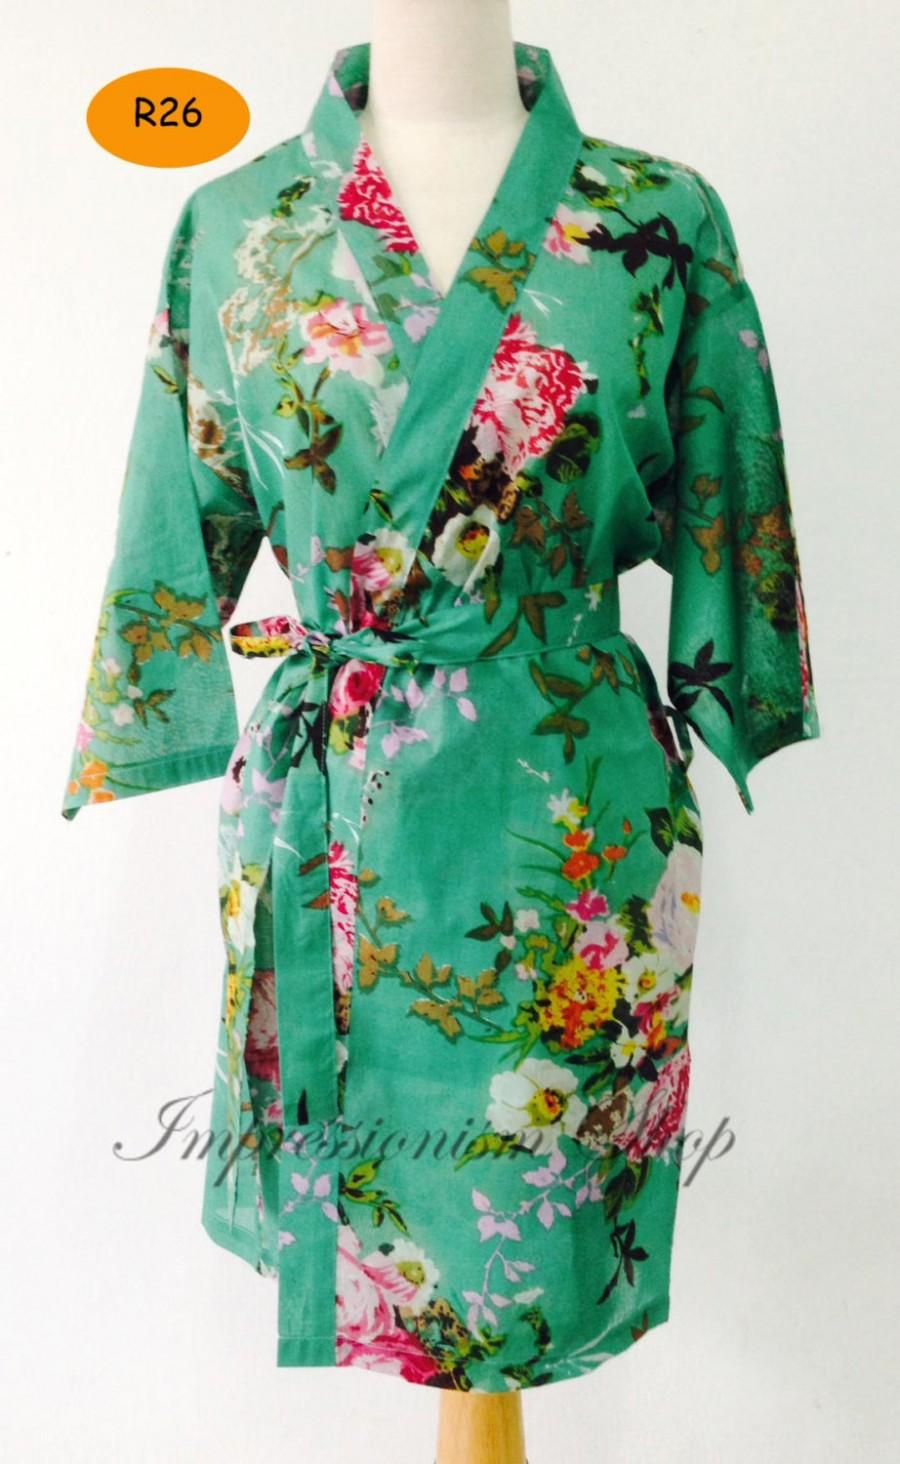 Wedding - Natural green Bridesmaid robes, Bride Kimono Robes, Bridesmaids Floral Robe and Blooms Pretty Getting Ready Pictures Bridesmaids Gift Idea